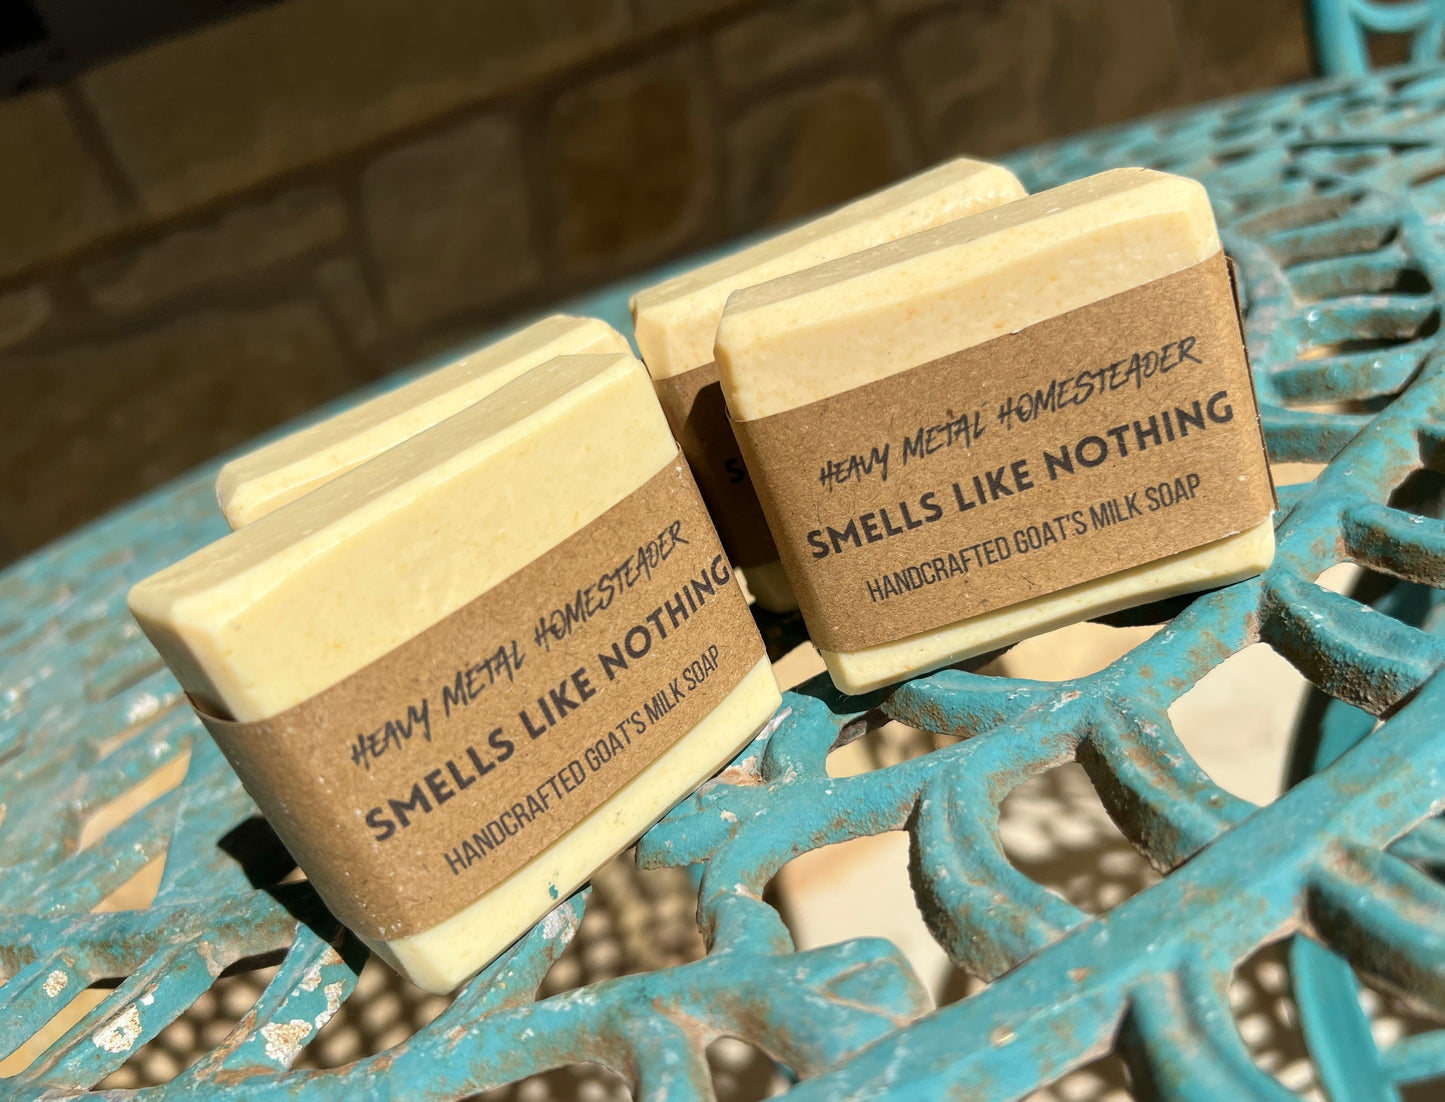 Smells Like Nothing....Unscented Goat's Milk Soap